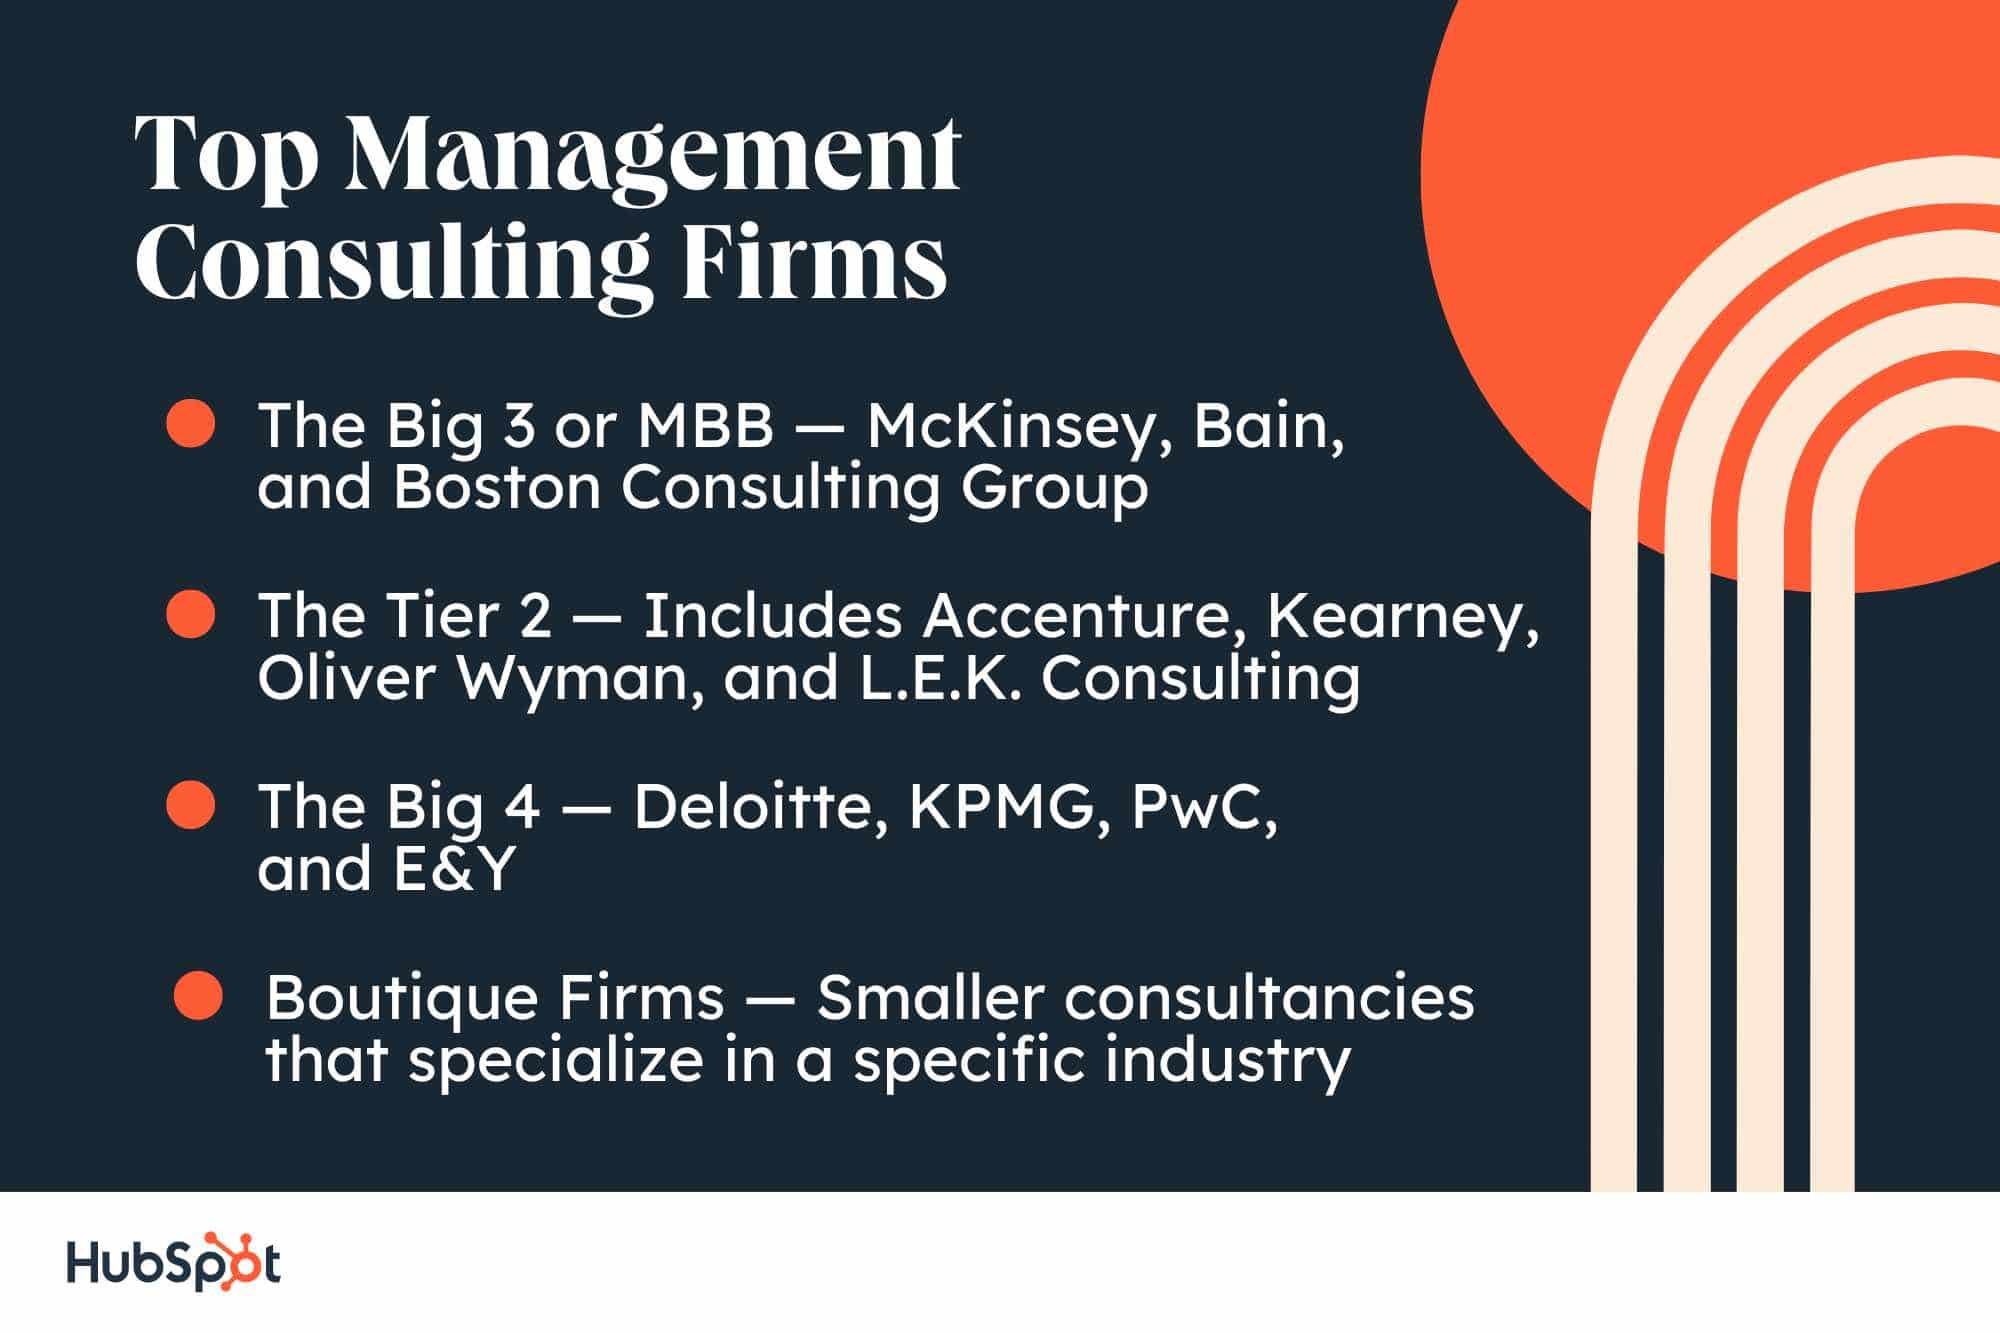 Consulting career path. Top Management Consulting Firms. The Big 3 or MBB — McKinsey, Bain, and Boston Consulting Group. The Tier 2 — Includes Accenture, Kearney, Oliver Wyman, and L.E.K. Consulting. The Big 4 — Deloitte, KPMG, PwC, and E&Y. Boutique Firms — Smaller consultancies that specialize in a specific industry.